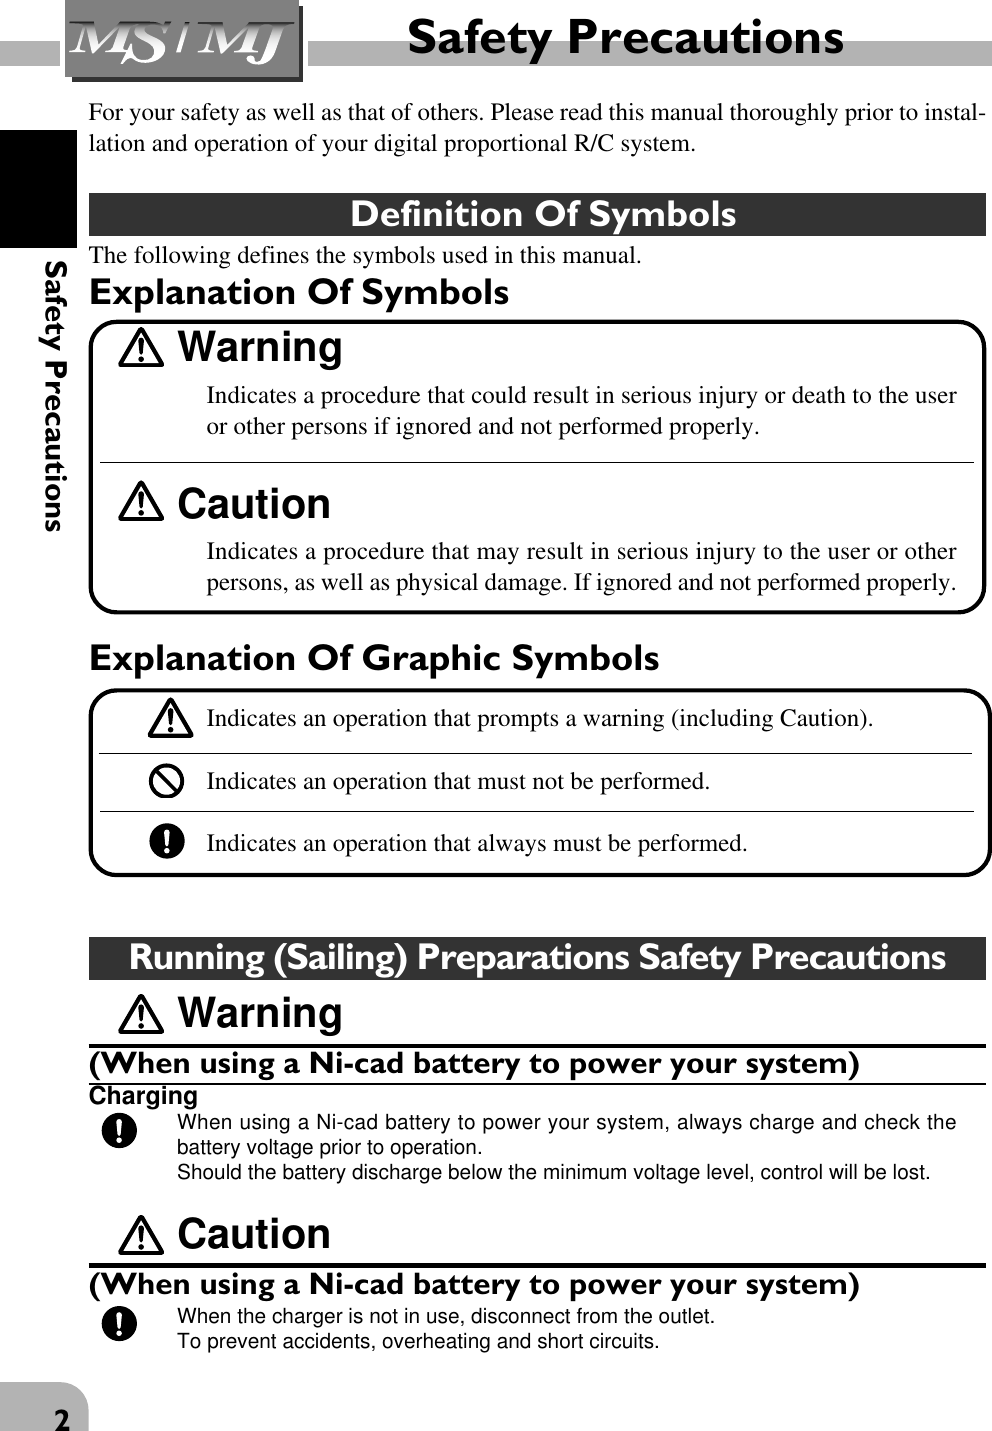 2Safety PrecautionsFor your safety as well as that of others. Please read this manual thoroughly prior to instal-lation and operation of your digital proportional R/C system. Definition Of SymbolsThe following defines the symbols used in this manual.Explanation Of SymbolsWarningIndicates a procedure that could result in serious injury or death to the useror other persons if ignored and not performed properly.CautionIndicates a procedure that may result in serious injury to the user or otherpersons, as well as physical damage. If ignored and not performed properly.Safety PrecautionsExplanation Of Graphic SymbolsIndicates an operation that prompts a warning (including Caution).Indicates an operation that must not be performed.Indicates an operation that always must be performed.Caution(When using a Ni-cad battery to power your system)When the charger is not in use, disconnect from the outlet.To prevent accidents, overheating and short circuits.Running (Sailing) Preparations Safety PrecautionsWarning(When using a Ni-cad battery to power your system)ChargingWhen using a Ni-cad battery to power your system, always charge and check thebattery voltage prior to operation.Should the battery discharge below the minimum voltage level, control will be lost.